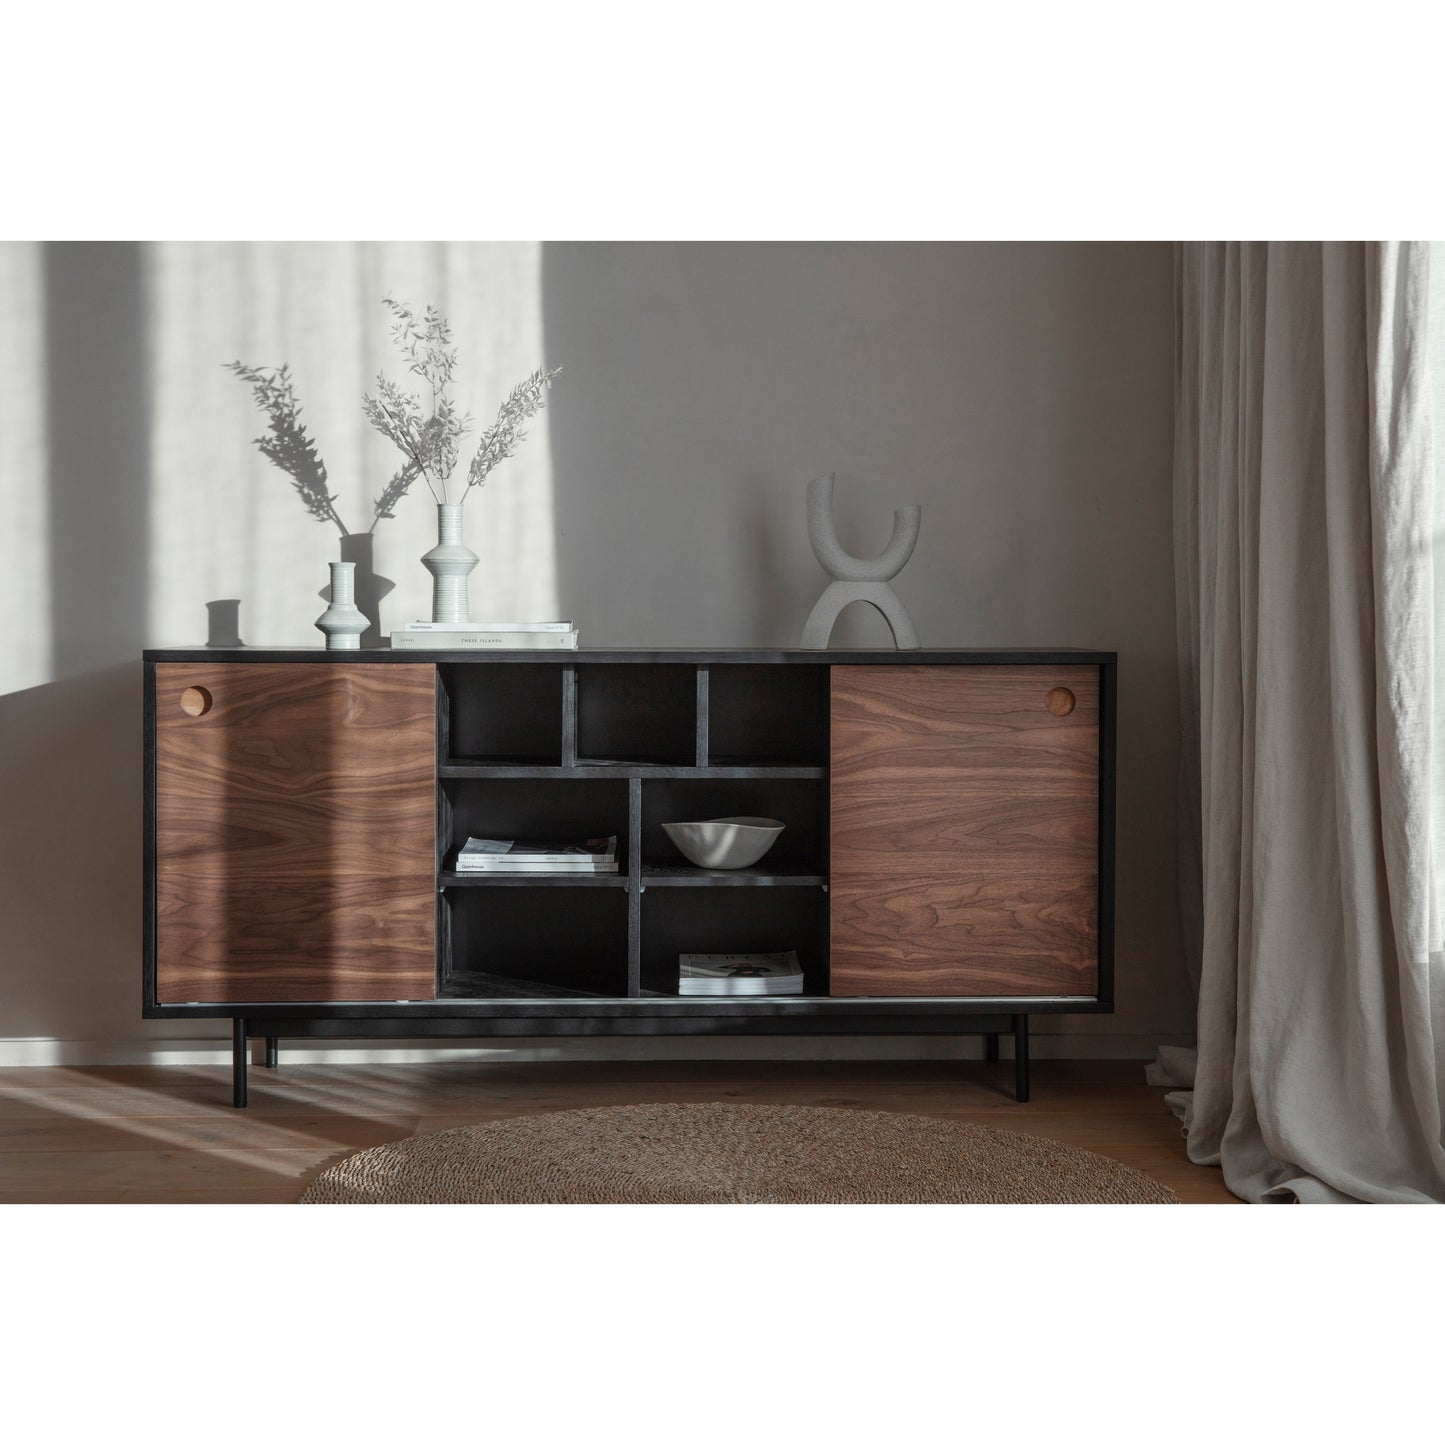 A Barbican Sideboard 1600x400x750mm by Kikiathome.co.uk adds elegance to any interior decor with its sleek design and spacious surface, perfect for showcasing vases or